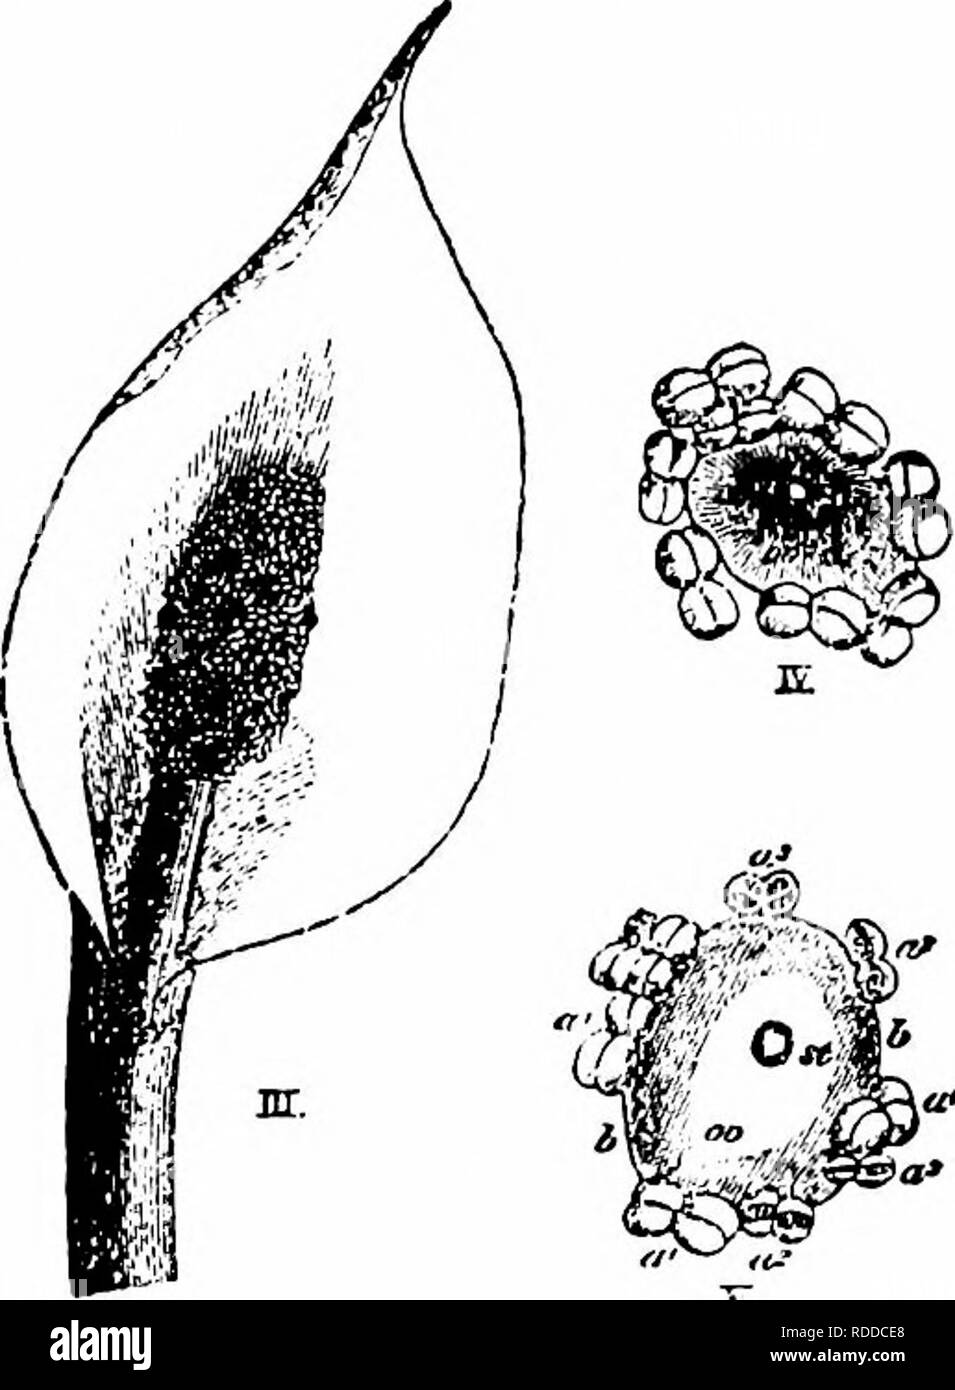 . Handbook of flower pollination : based upon Hermann Mu?ller's work 'The fertilisation of flowers by insects' . Fertilization of plants. AROIDEAE 497 952. Biarum Schot., and 953. Cryptocoryne Fisch. The flower mechanisms of species belonging to these genera resemble that of Nos. 2930 and 2931. 954. Calla L. Protogynous, hermaphrodite fiowers, closely crowded on a fleshy spadix, with a shallow spathe. 2932. C. palustris L. (Herm. Muller,' Weit. Beob.,' I, pp. 283-4; Warming, ' Smaa bid. o. morfol. Bidrag'; Engler u. Prantl, ' Araceae,' in ' D. nat. Pflanzenfam.,' II, 4; Knuth, Bot. Centralbl., Stock Photo